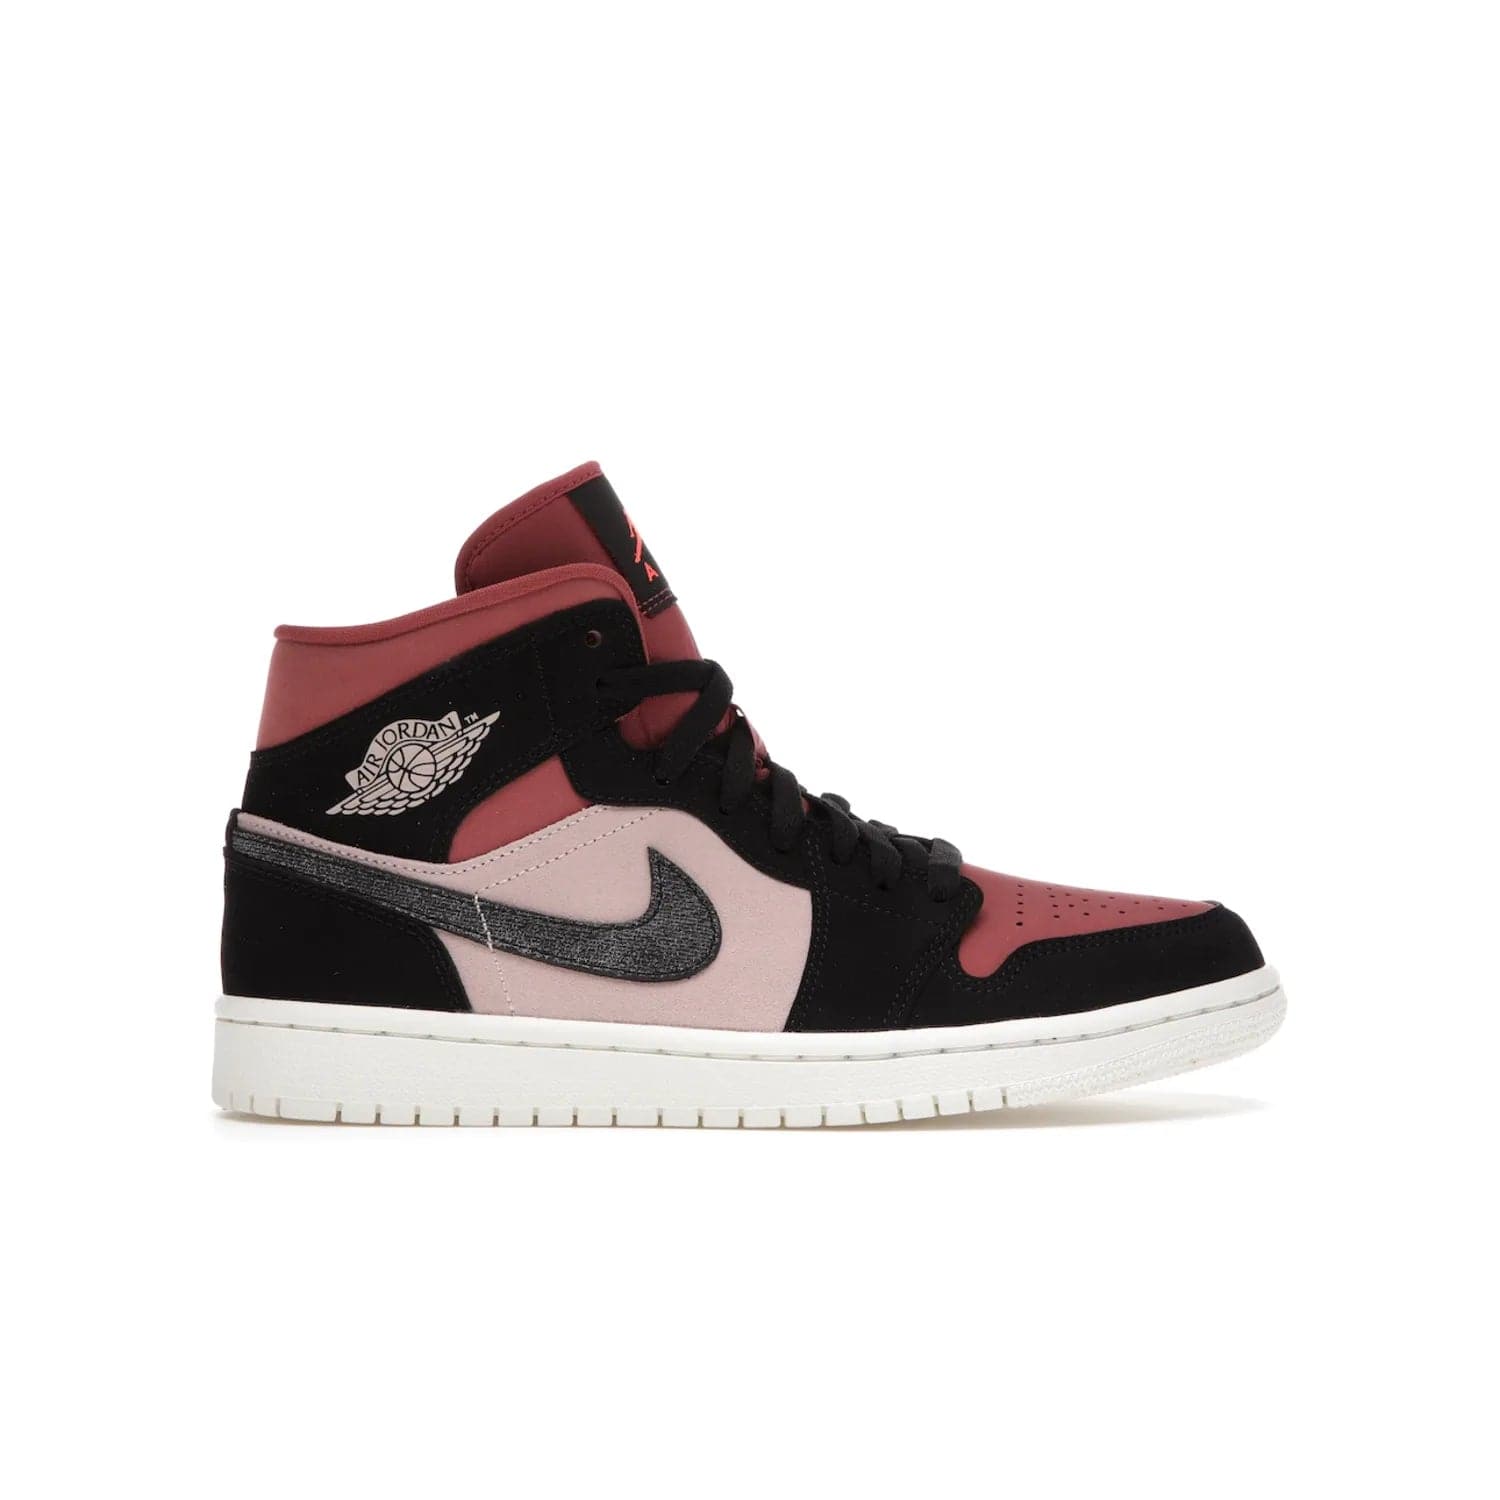 Jordan 1 Mid Canyon Rust (Women's) - Image 1 - Only at www.BallersClubKickz.com - The Air Jordan 1 Mid Canyon Rust for Women (W) is a stylish mid-top sneaker with distressed Nike swooshes and a white rubber cupsole. Featuring a blend of particle beige, canyon rust, sail and black, this versatile design will provide you with amazing comfort and style. Out now, 1st March 2021!